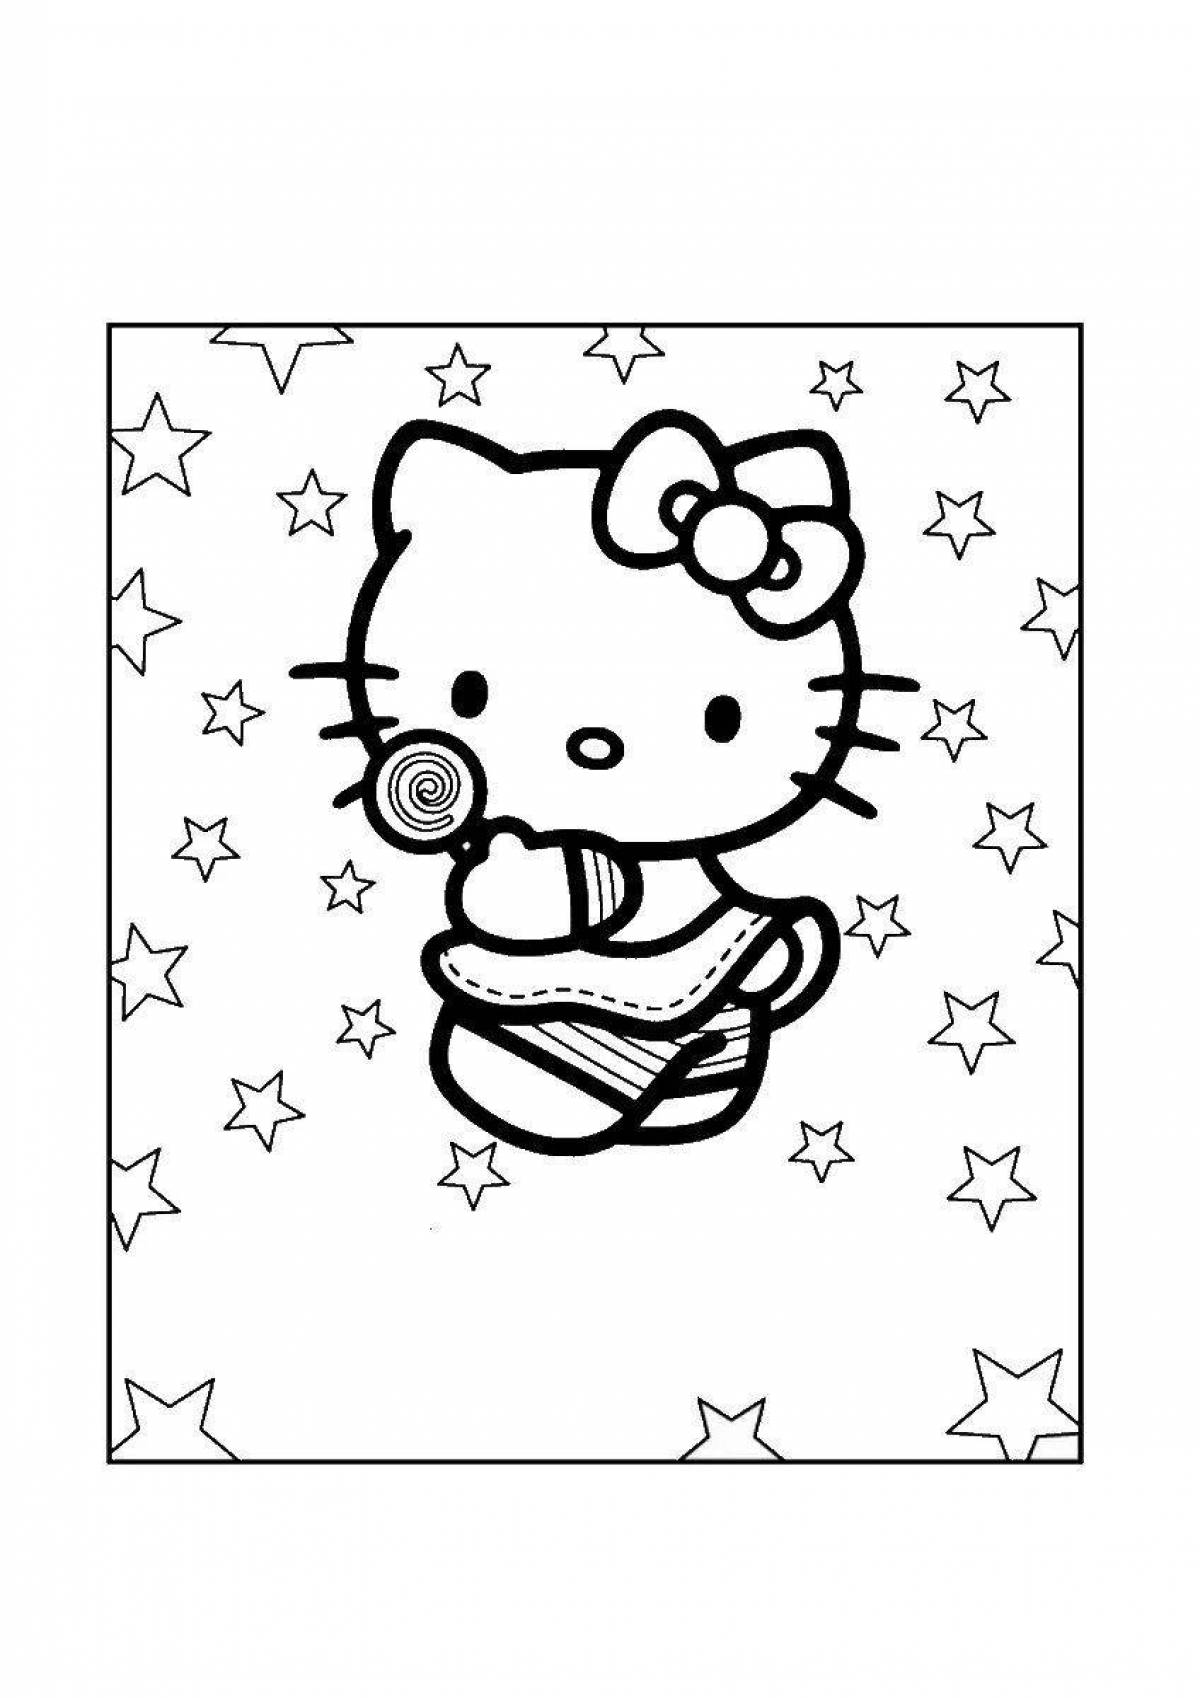 Exquisite hello kitty poster